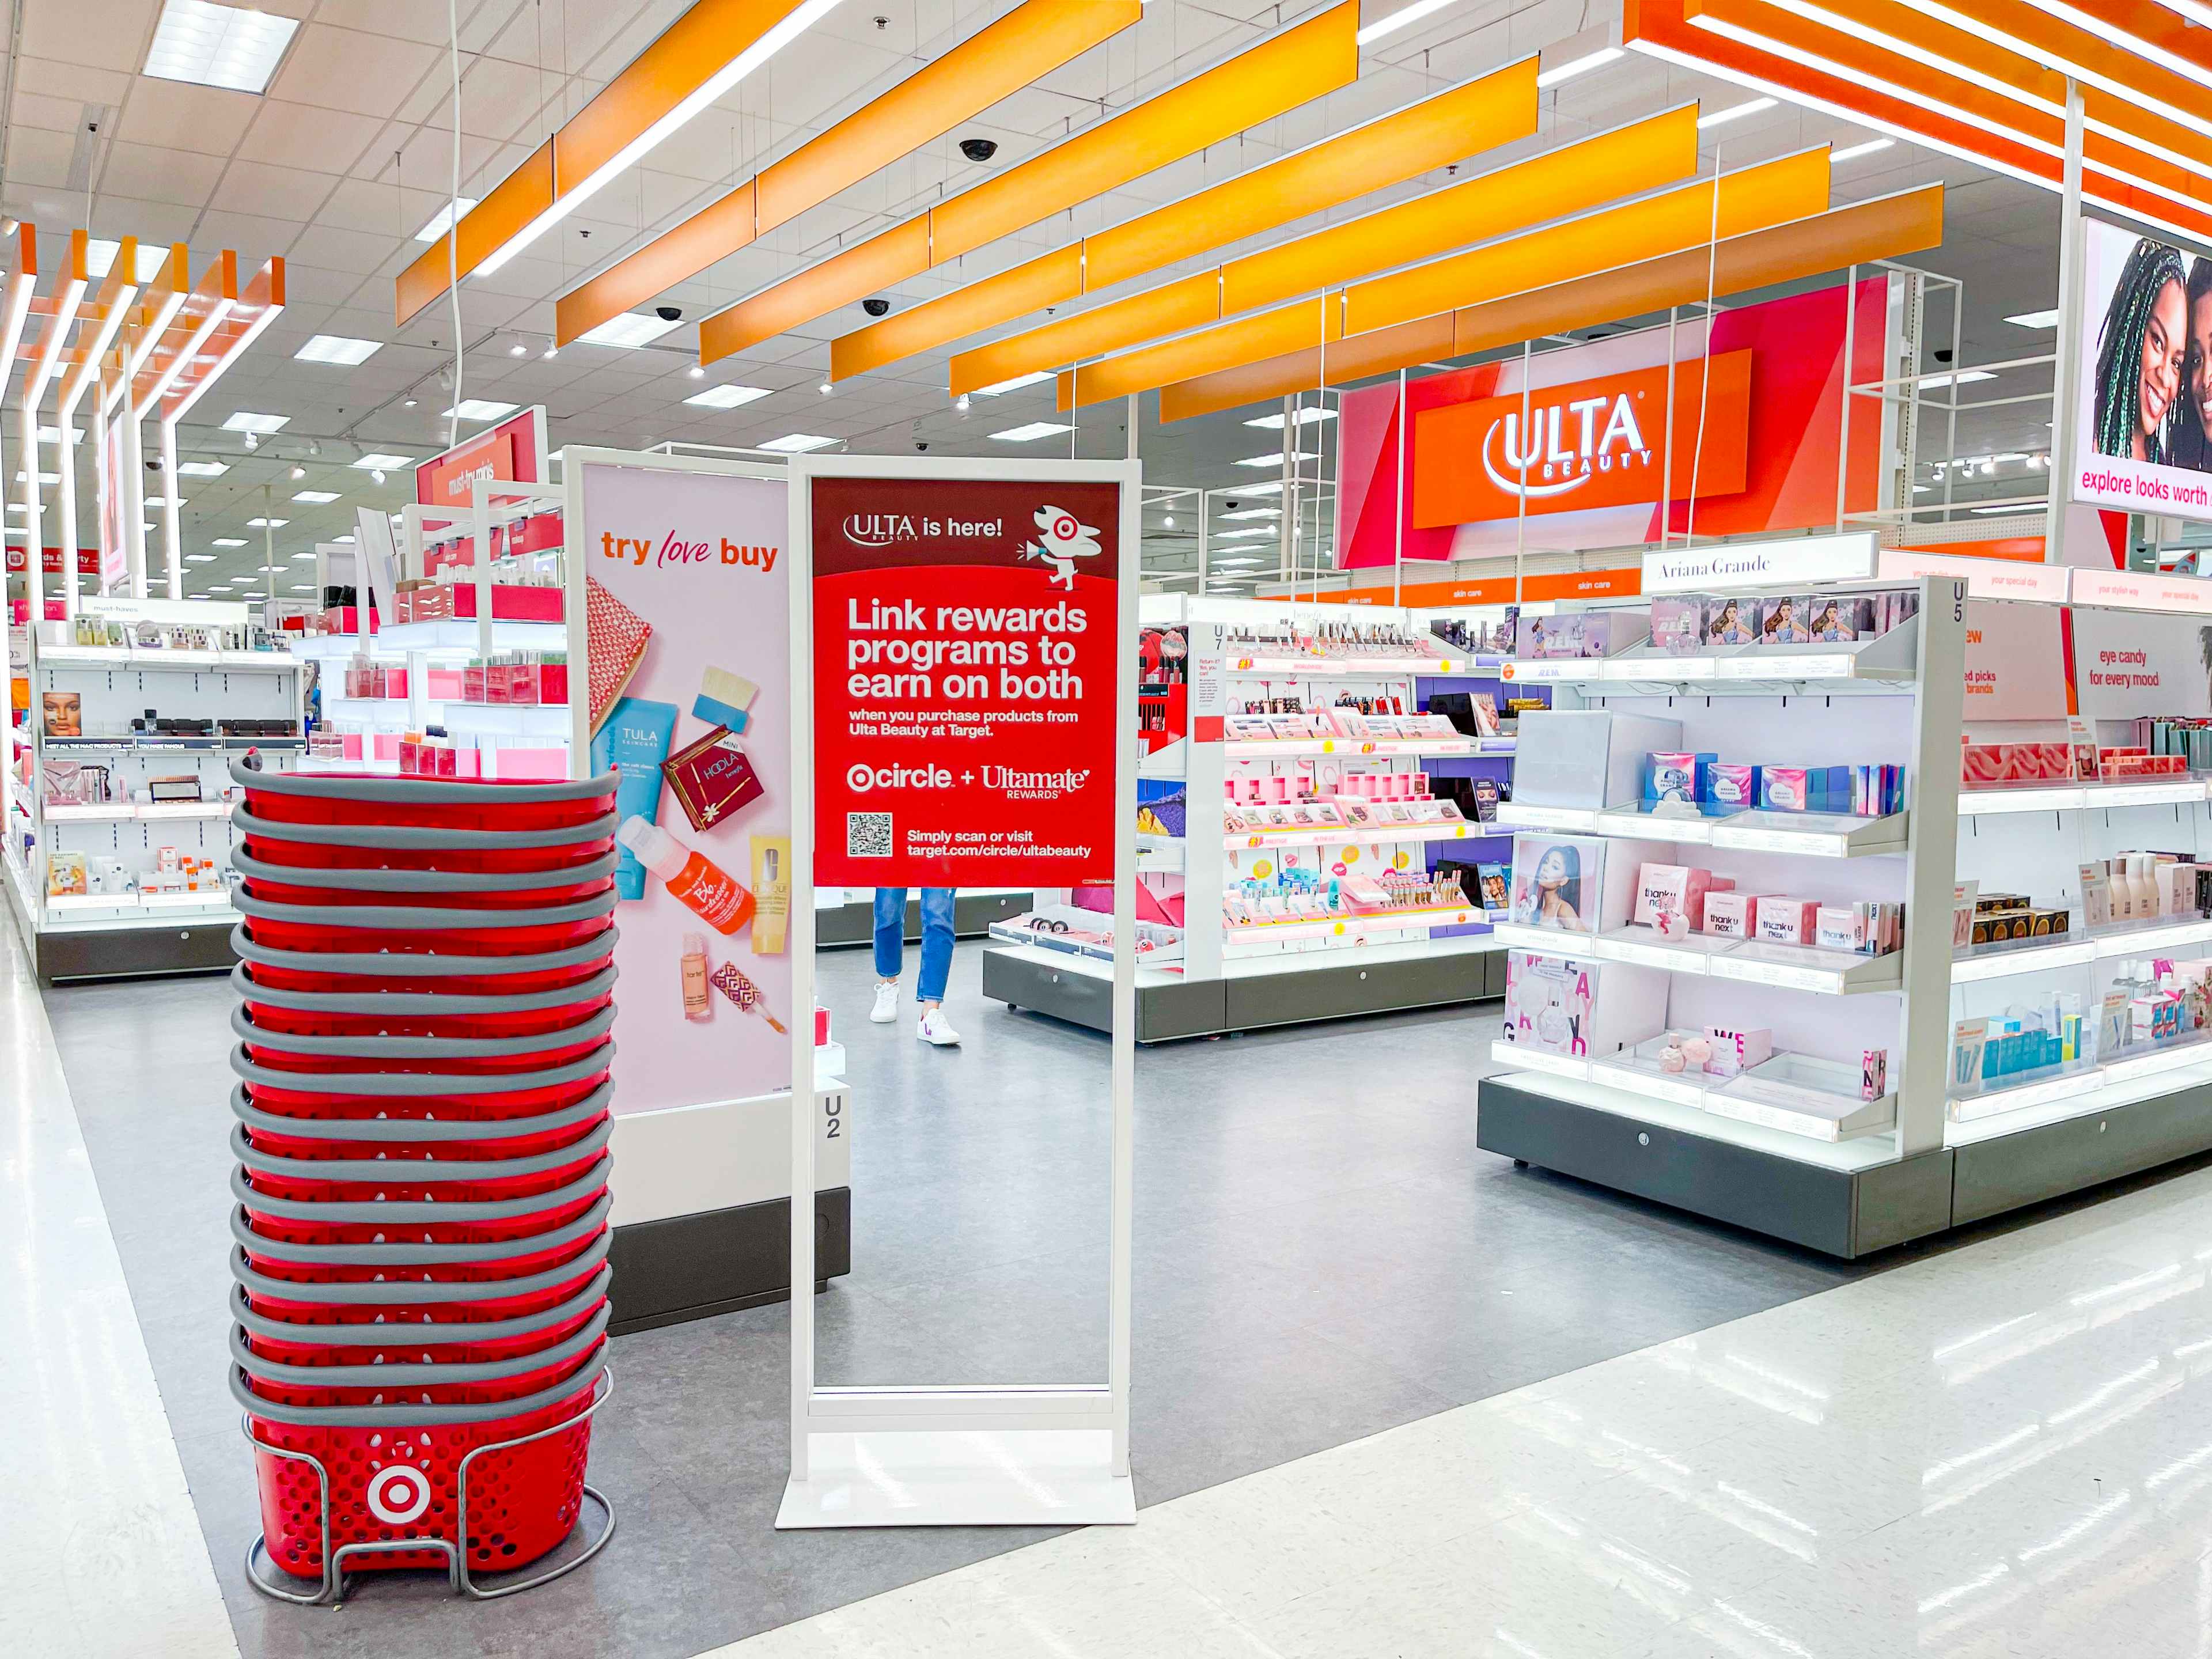 target hand baskets in front of ulta sign in the ulta section inside target